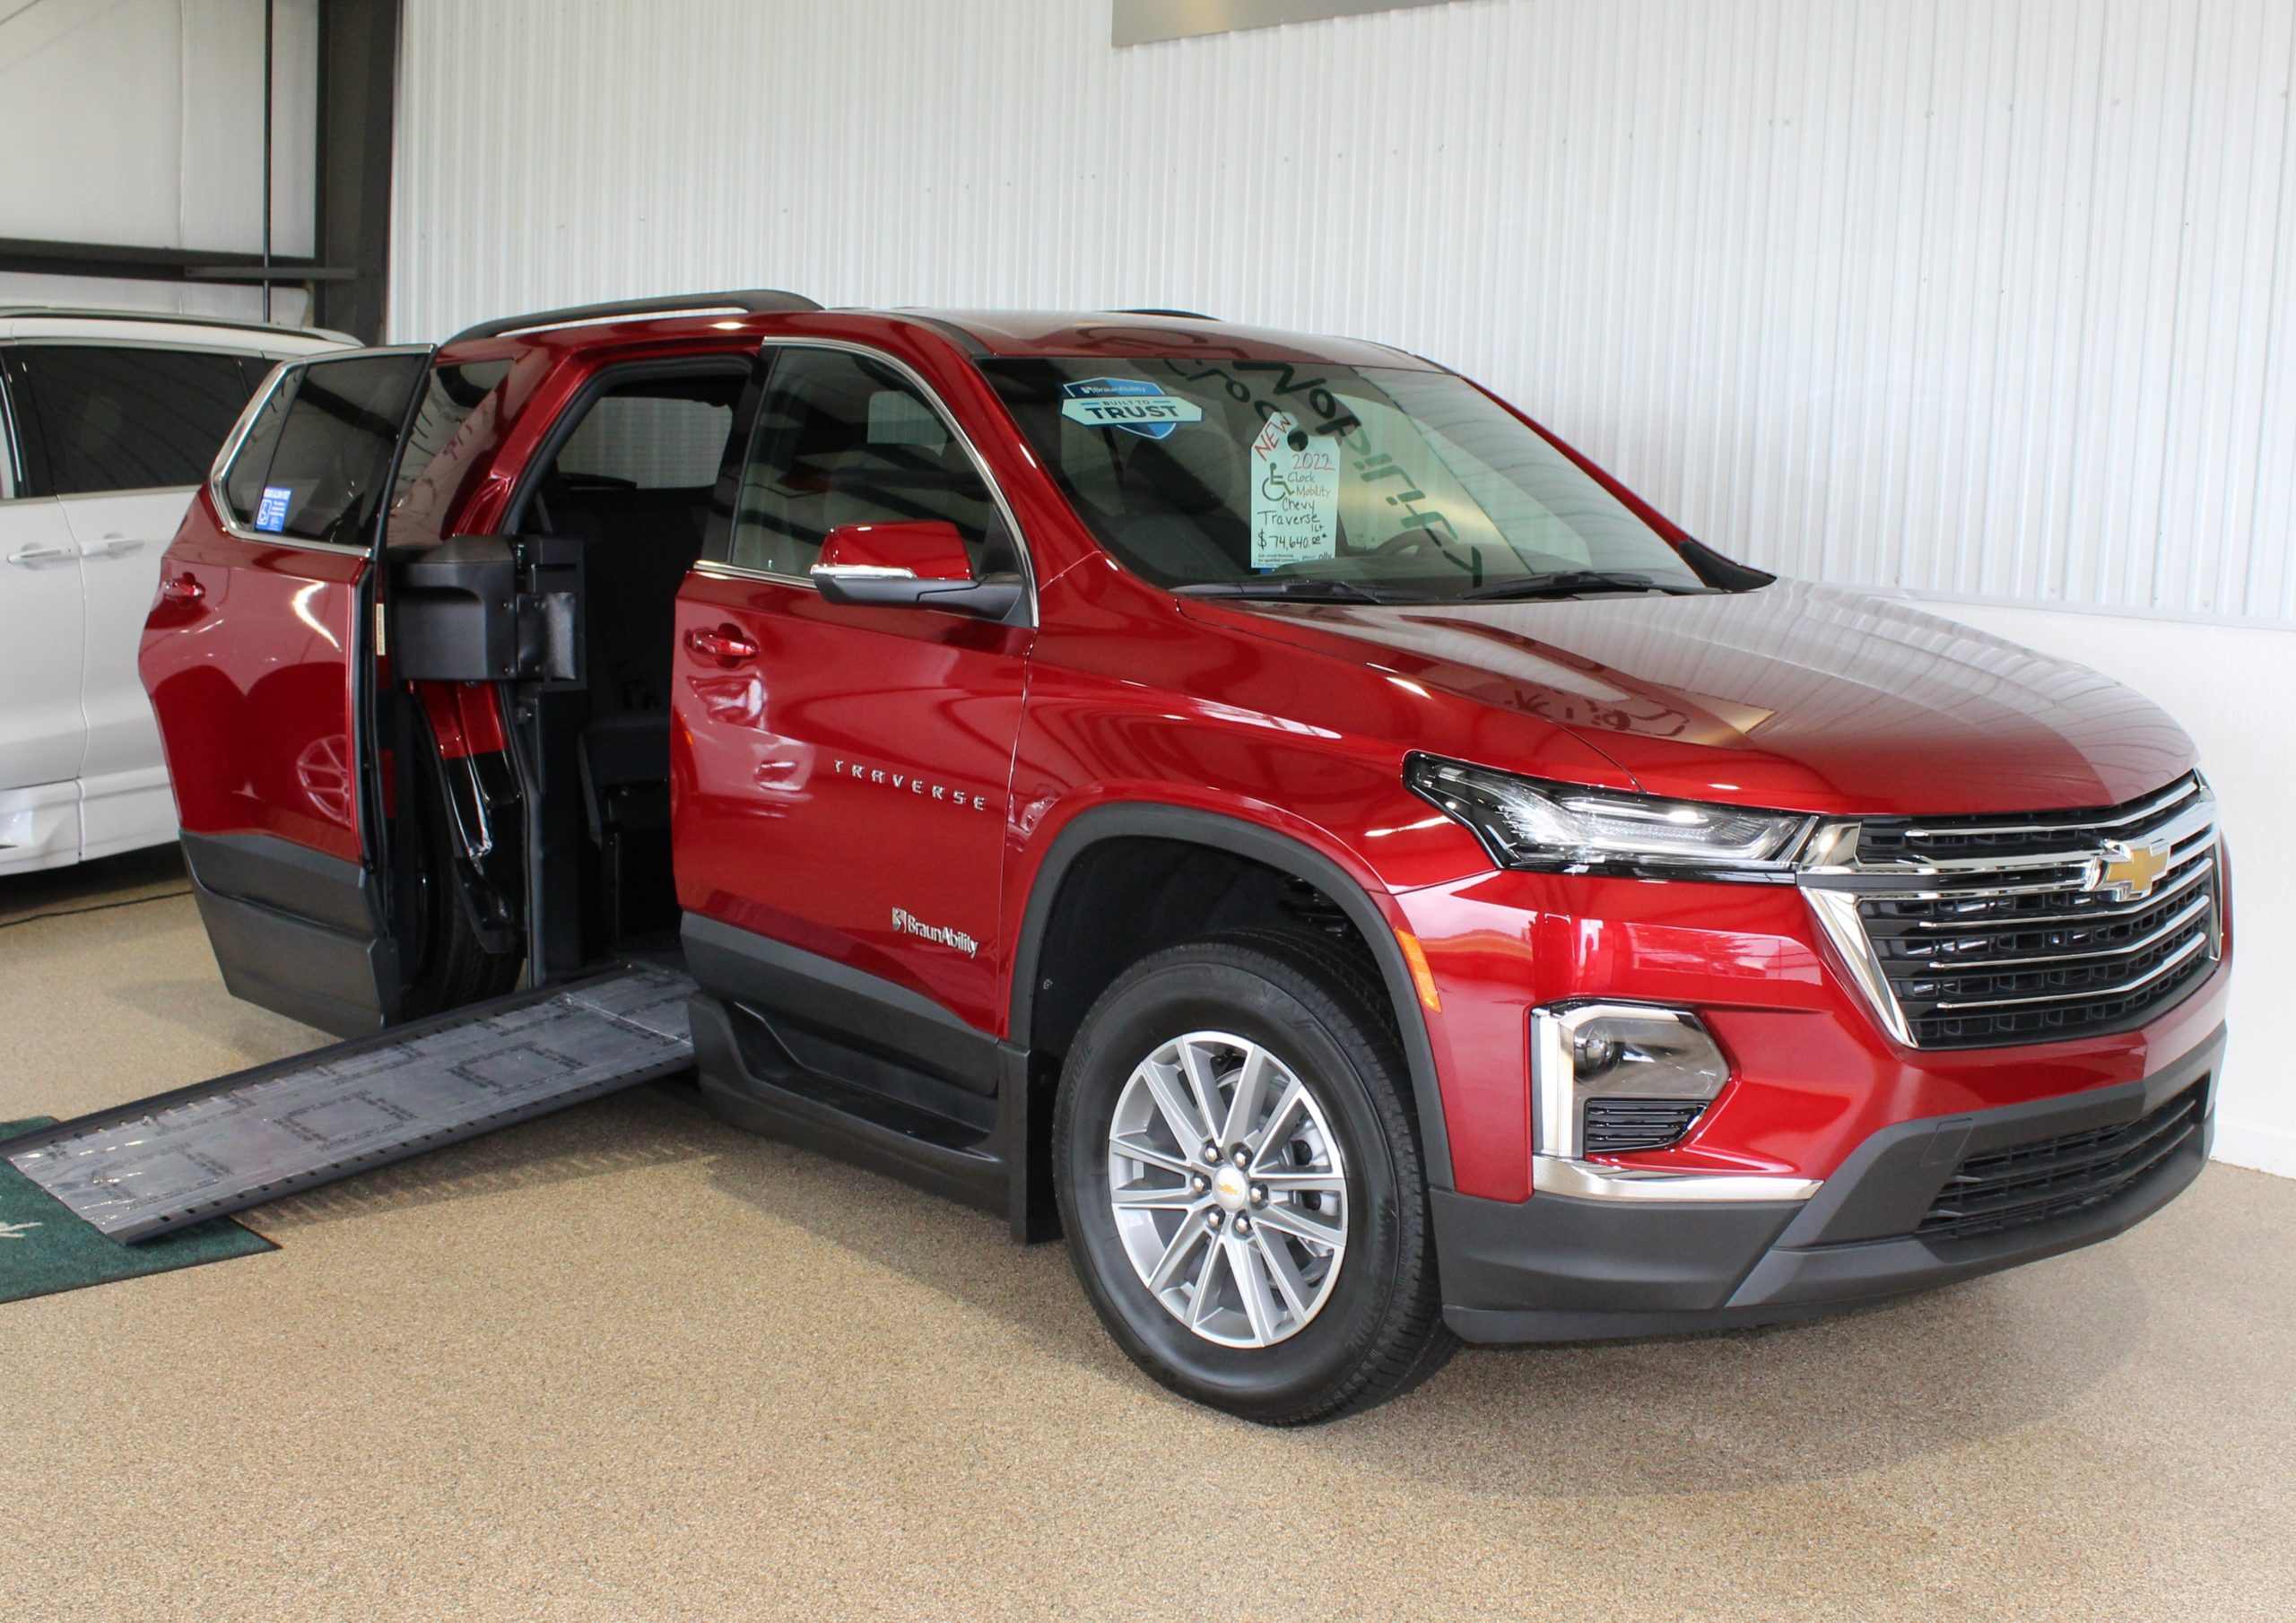 2022 Cherry Red Chevy Traverse 1LT with BraunAbility XI Conversion